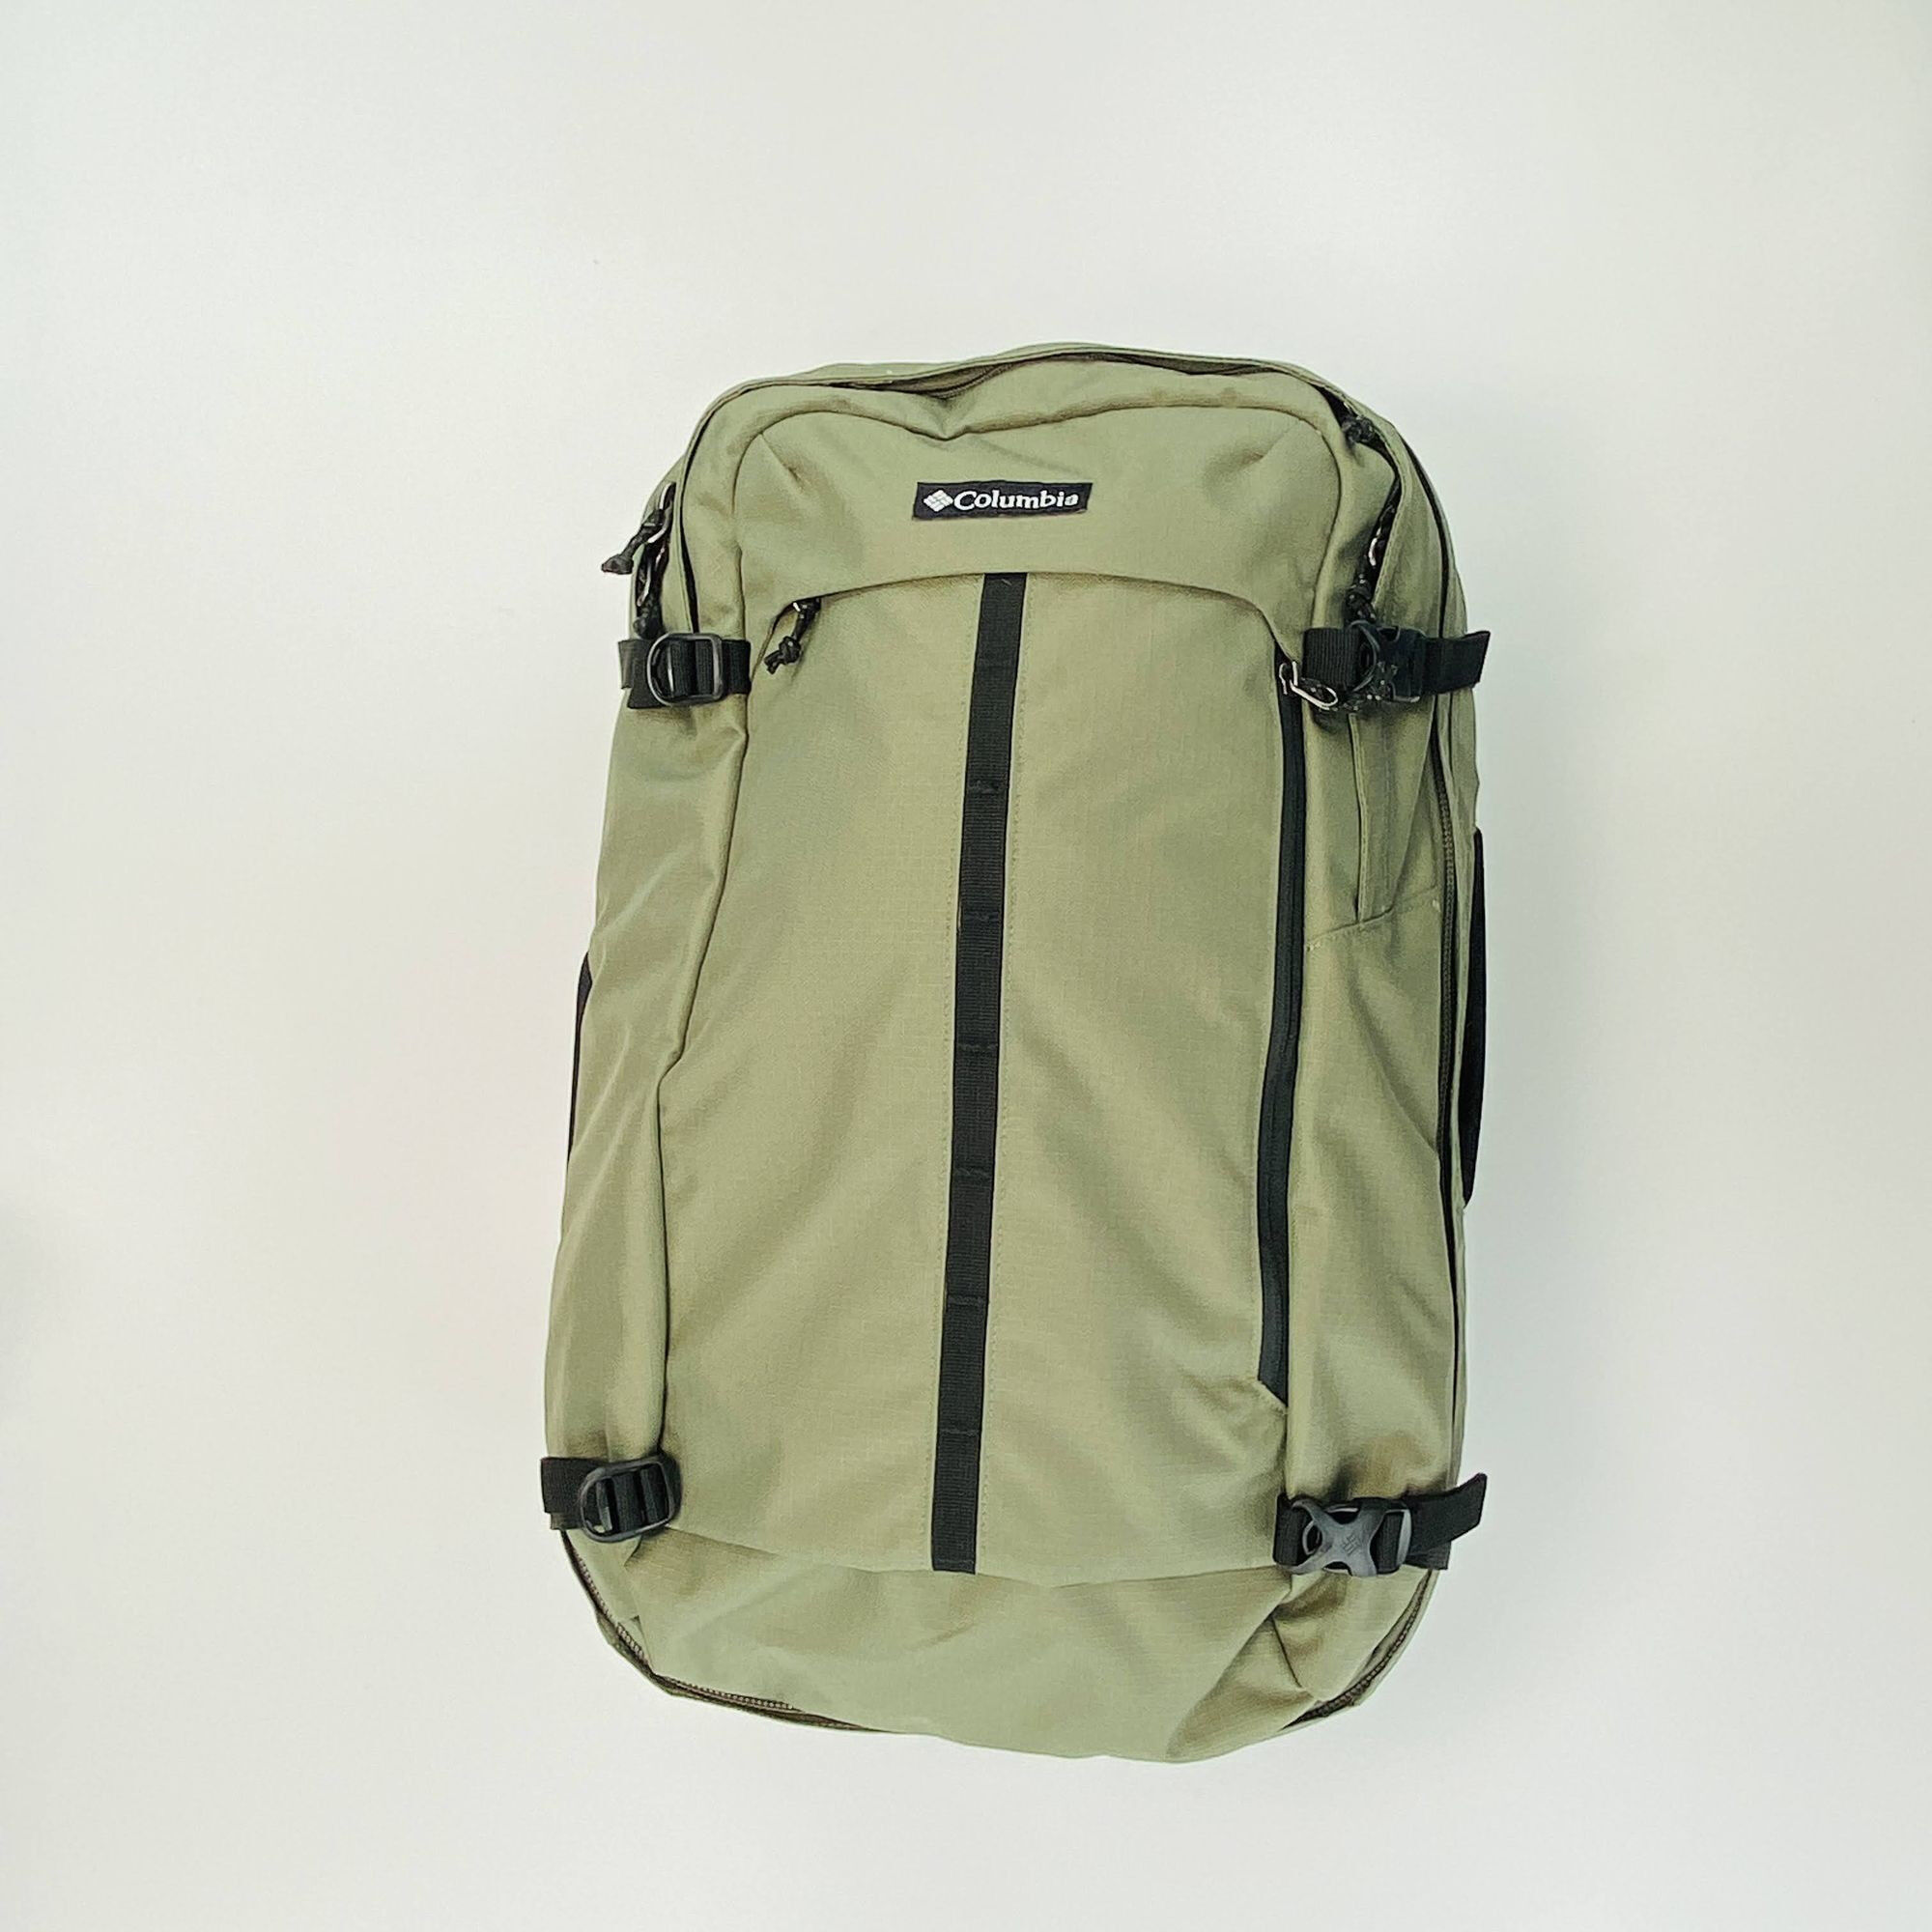 Columbia Mazama™ 34L Travel Backpack - Seconde main Sac à dos - Gris - Taille unique | Hardloop